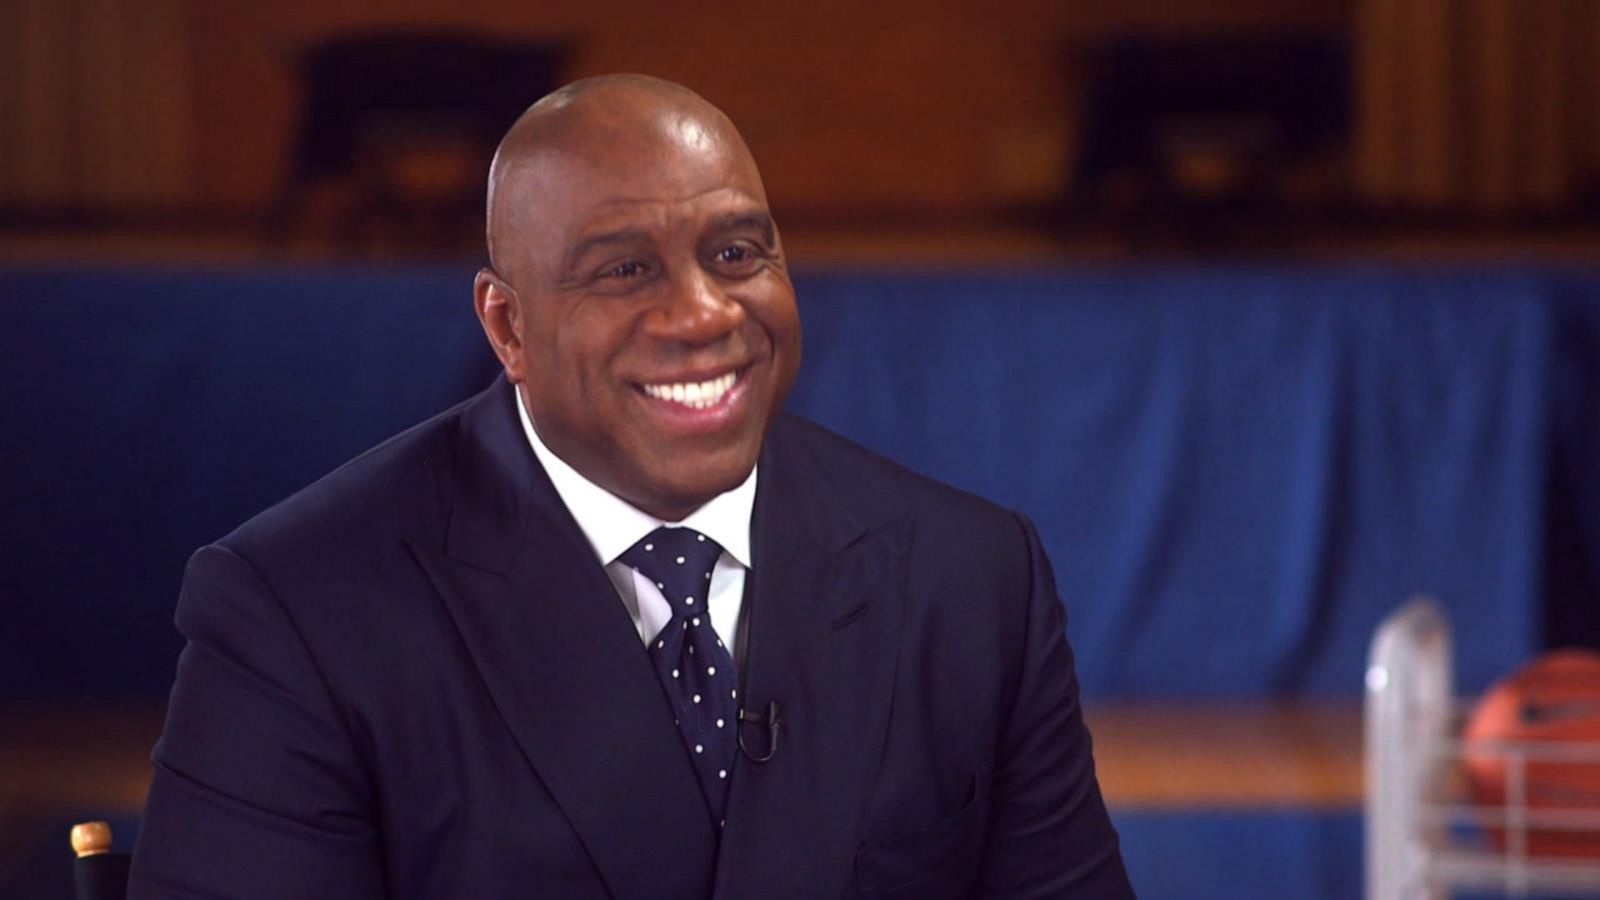 Magic Johnson says “I don't think [he'll take it] well” about